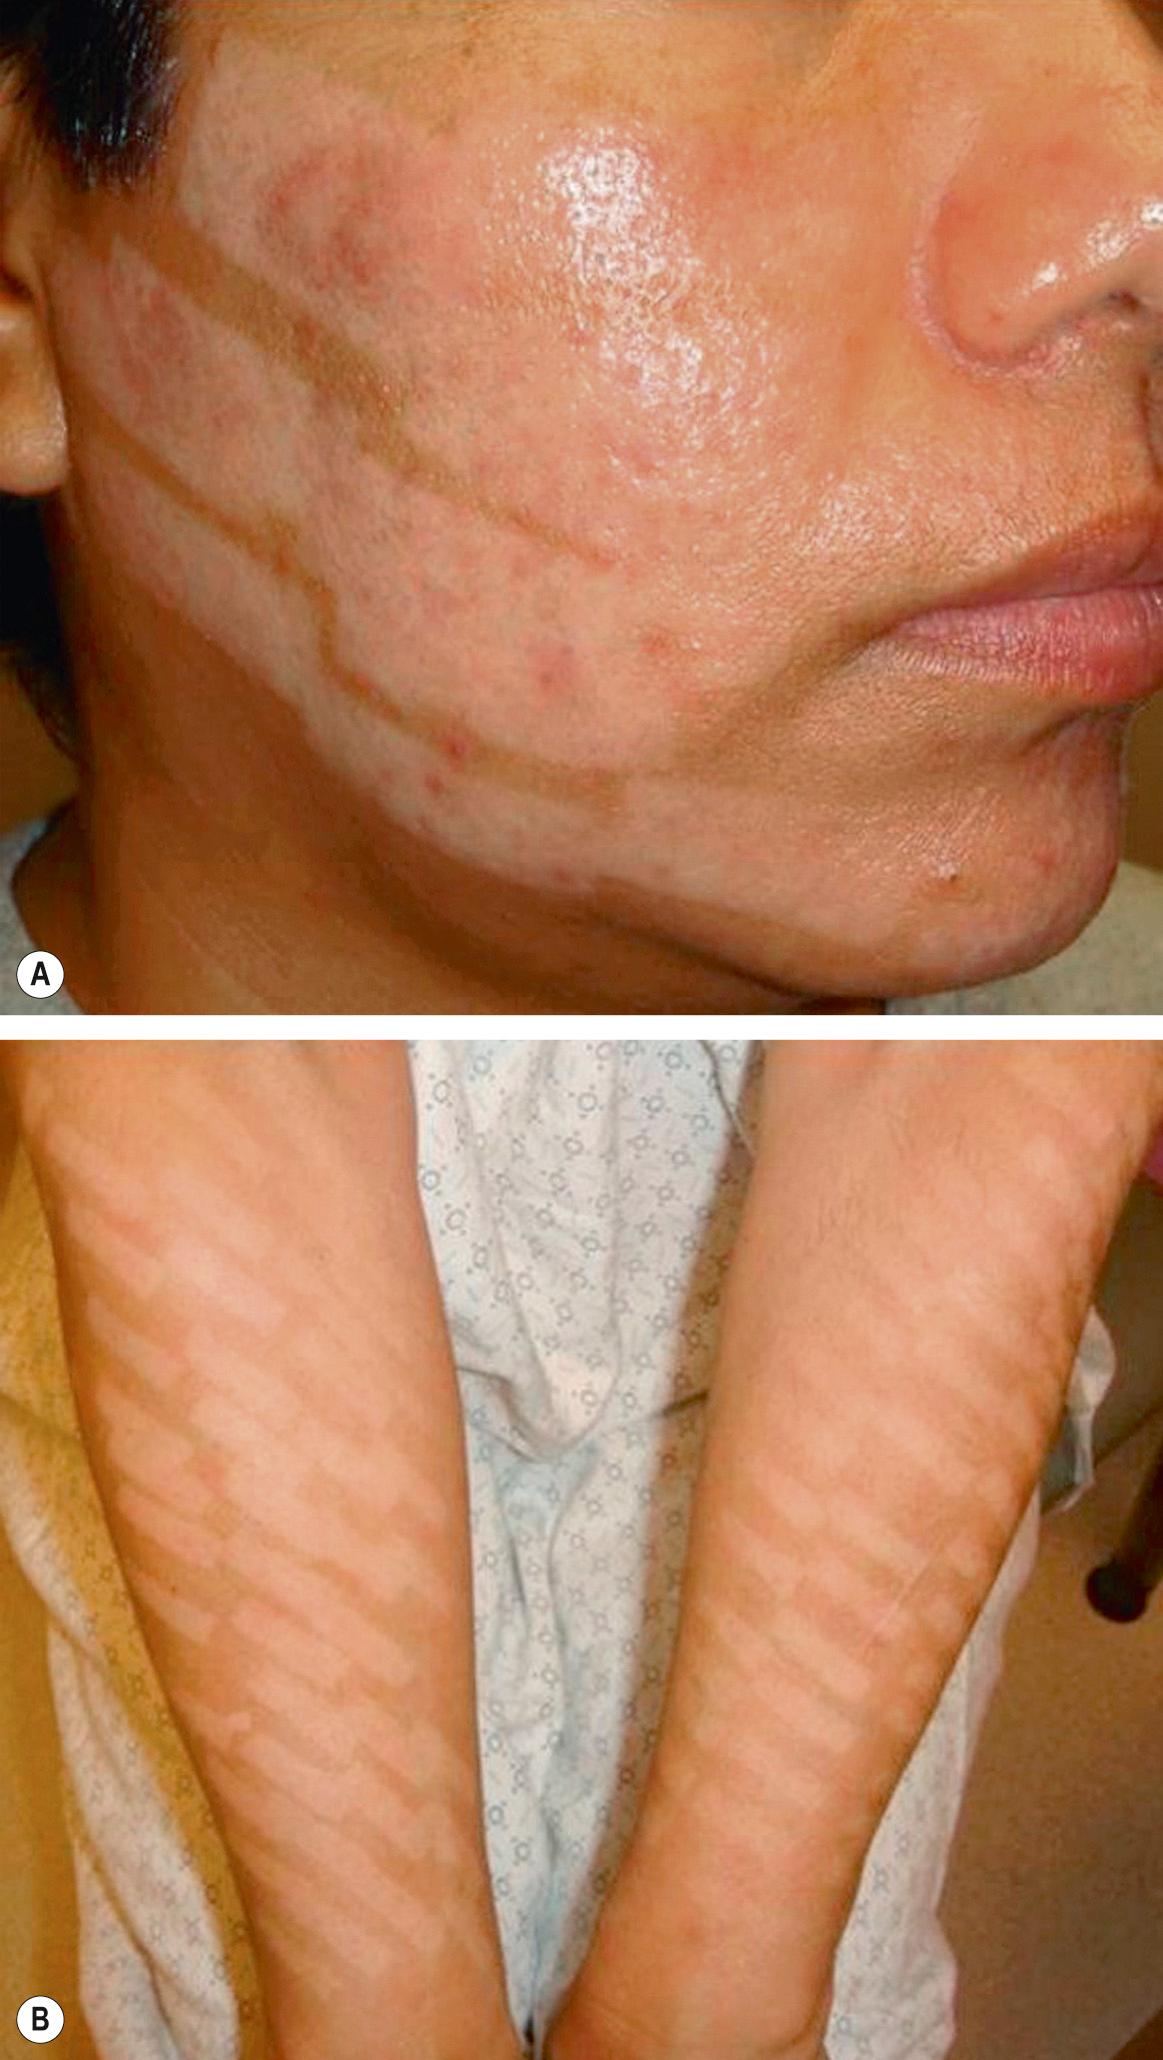 Fig. 137.3, Dyspigmentation with potential for scarring due to inappropriate intense pulsed light (IPL) treatments of the face (A) and arms (B) in two patients with darker skin phototypes.